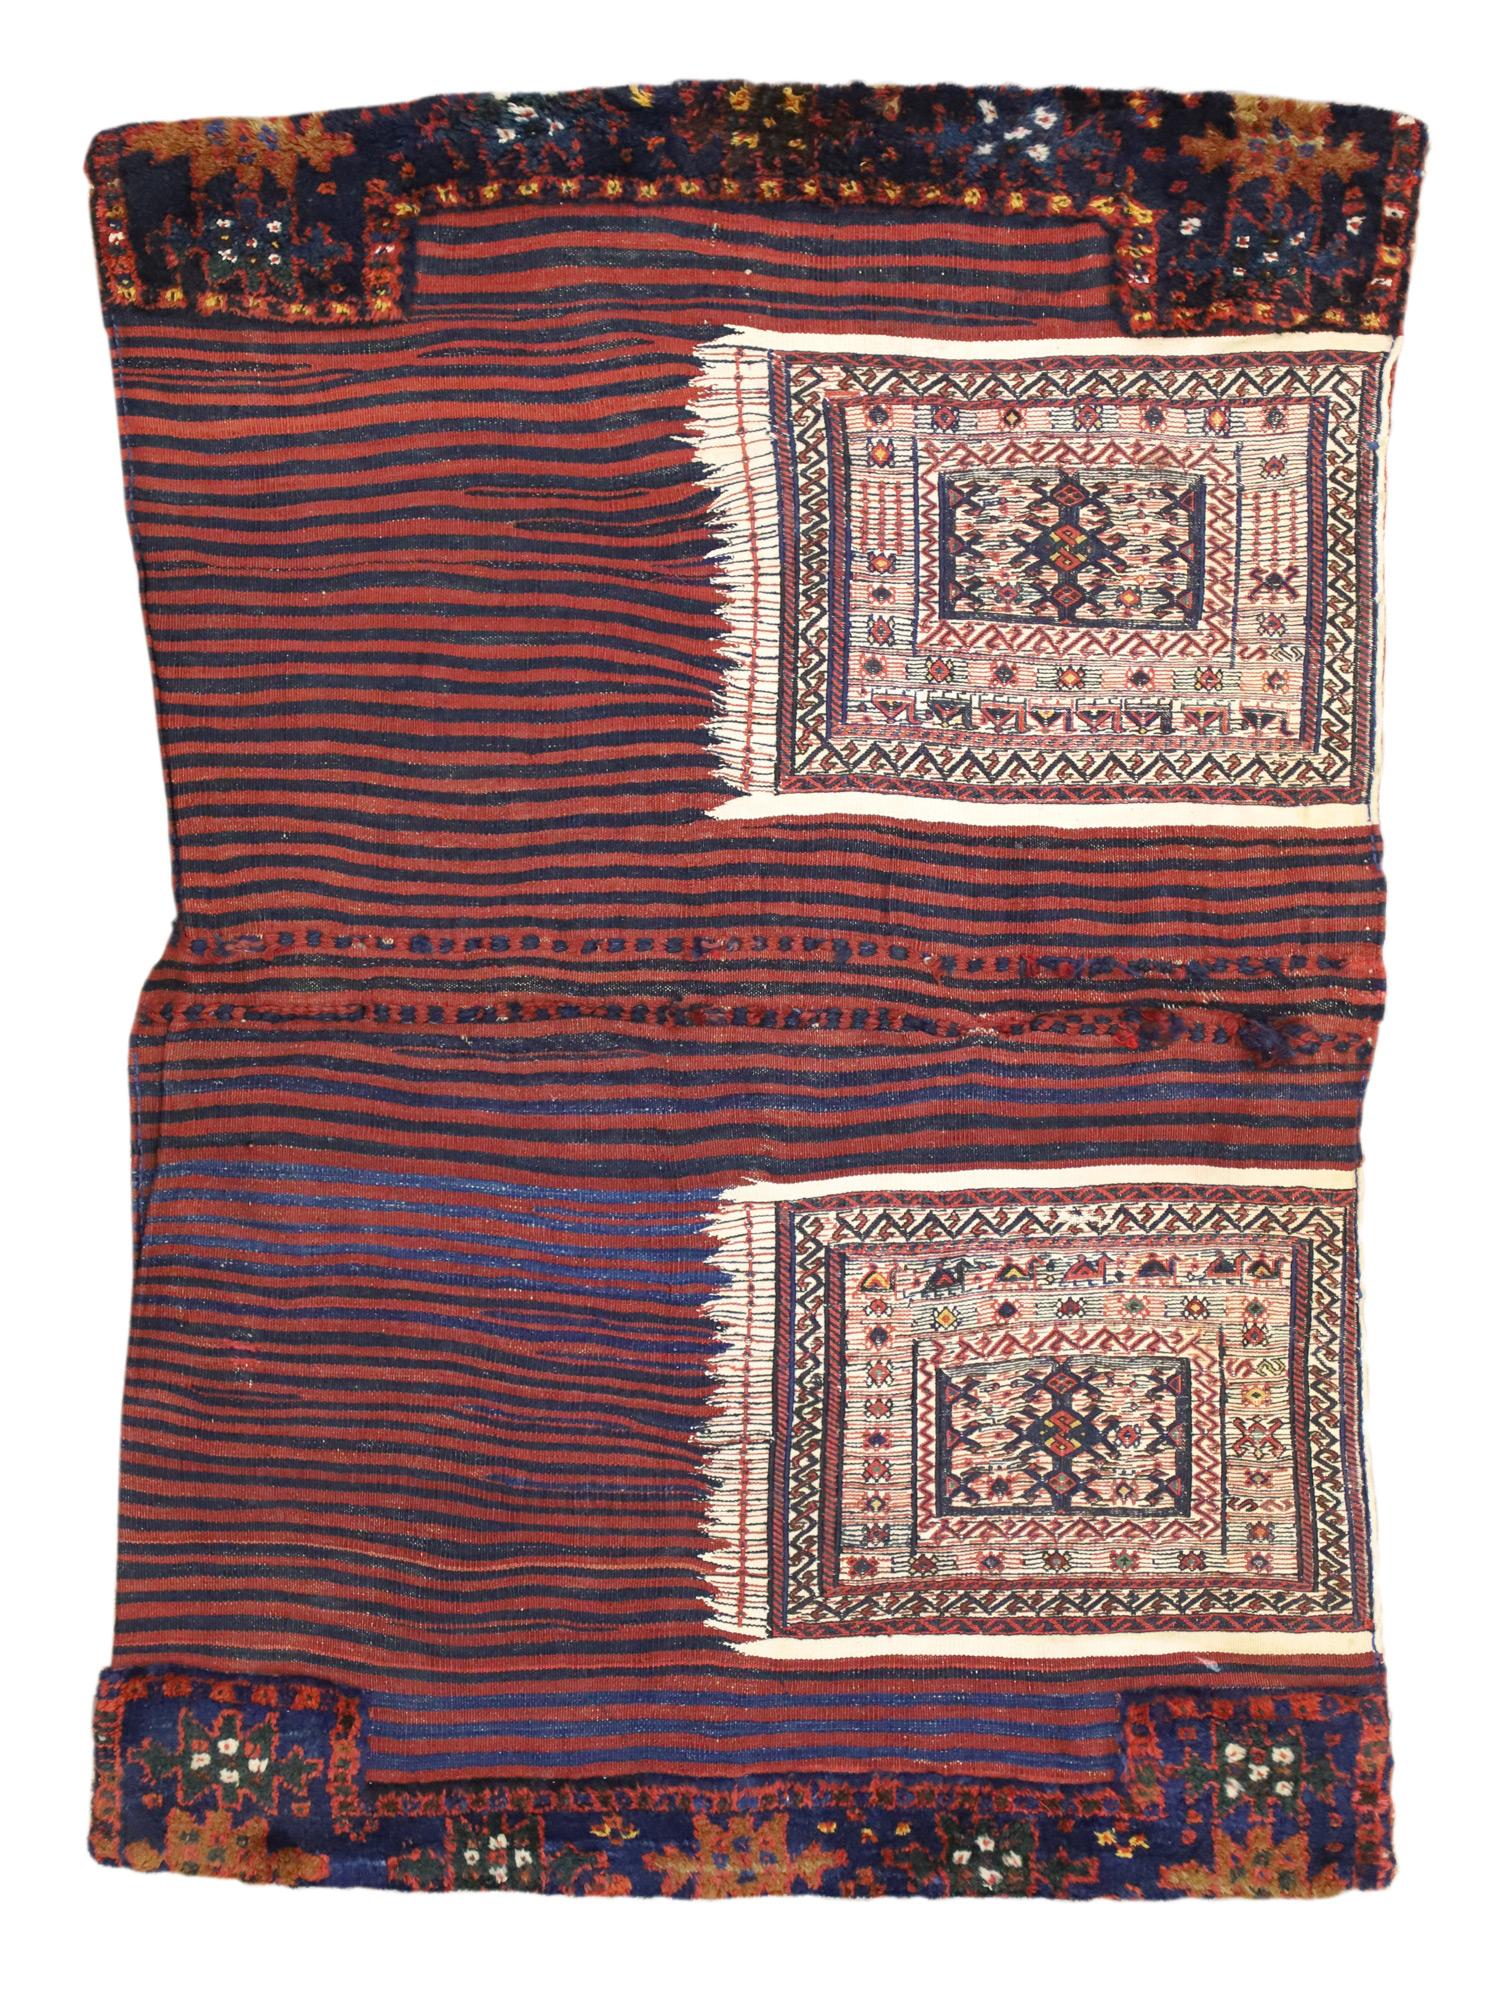 74584 Antique Persian Soumak Saddlebag, 03'05 x 05'02. 
Emanating nomadic charm with incredible detail and texture, this hand-knotted wool antique Persian Soumak saddlebag is a captivating vision of woven beauty. It features an allover geometric